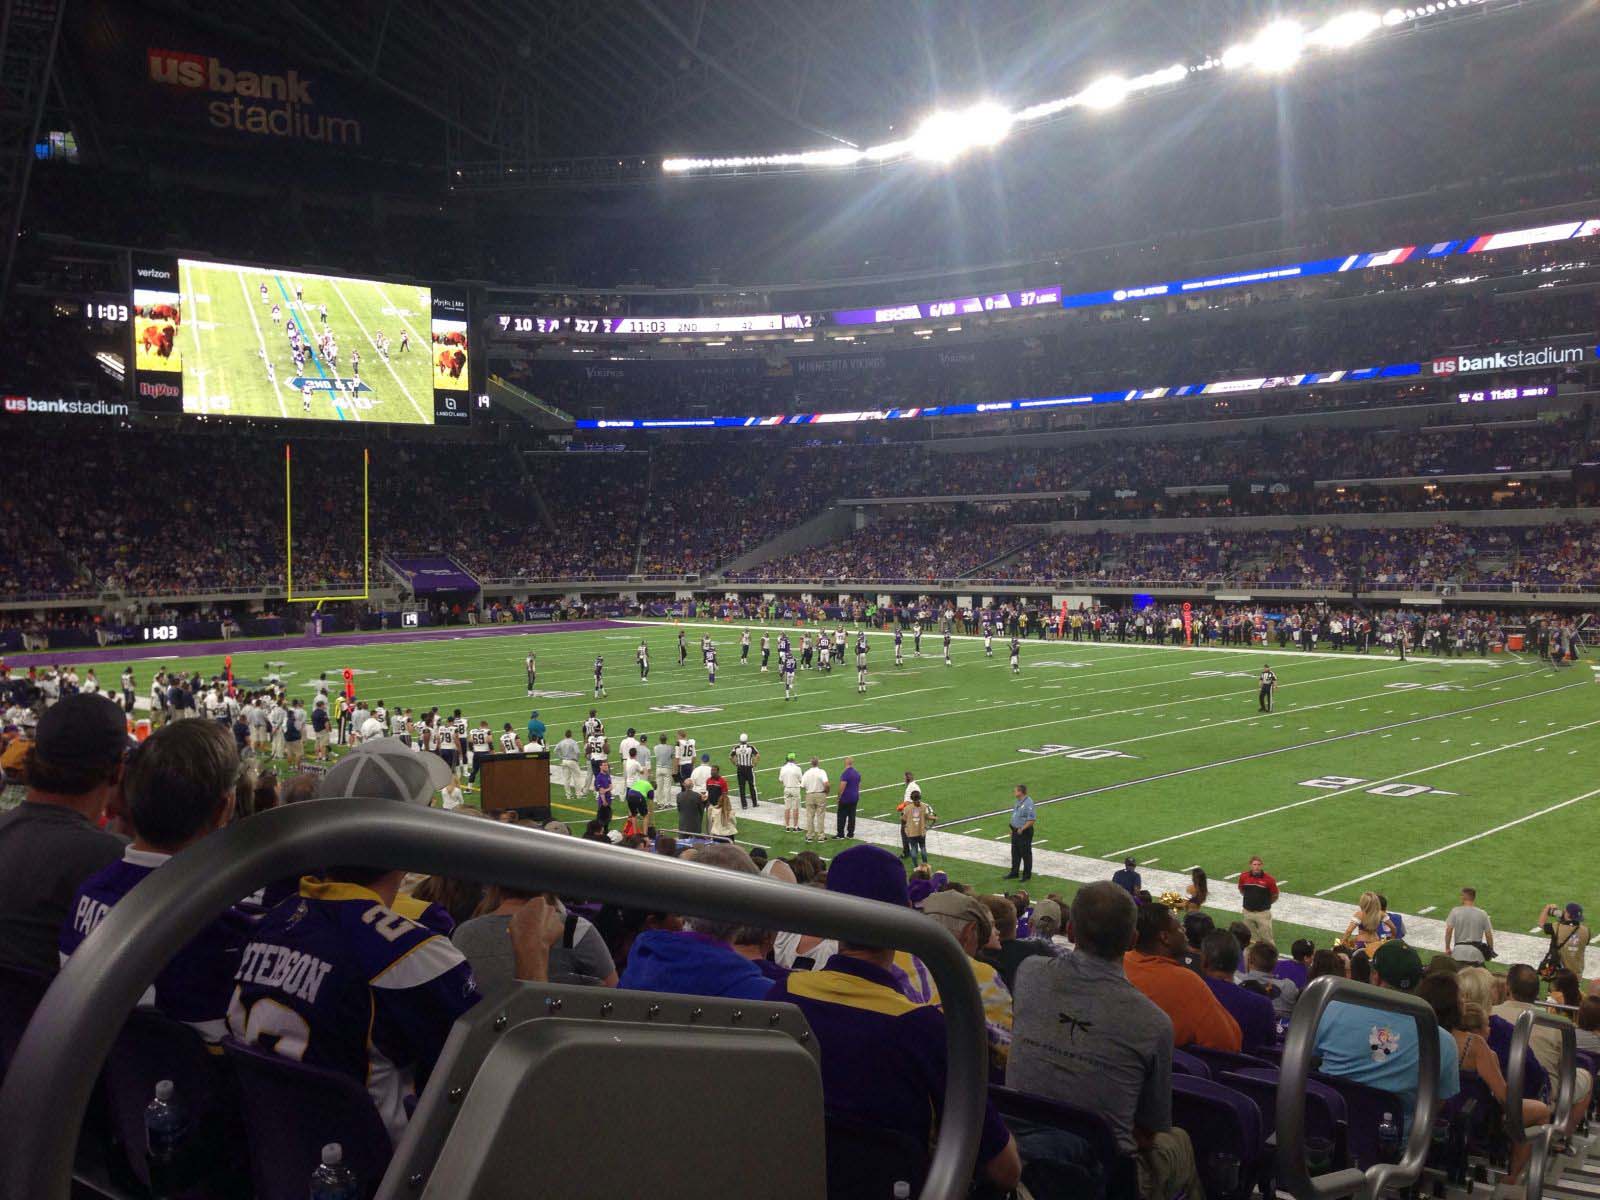 section 105, row 16 seat view  for football - u.s. bank stadium